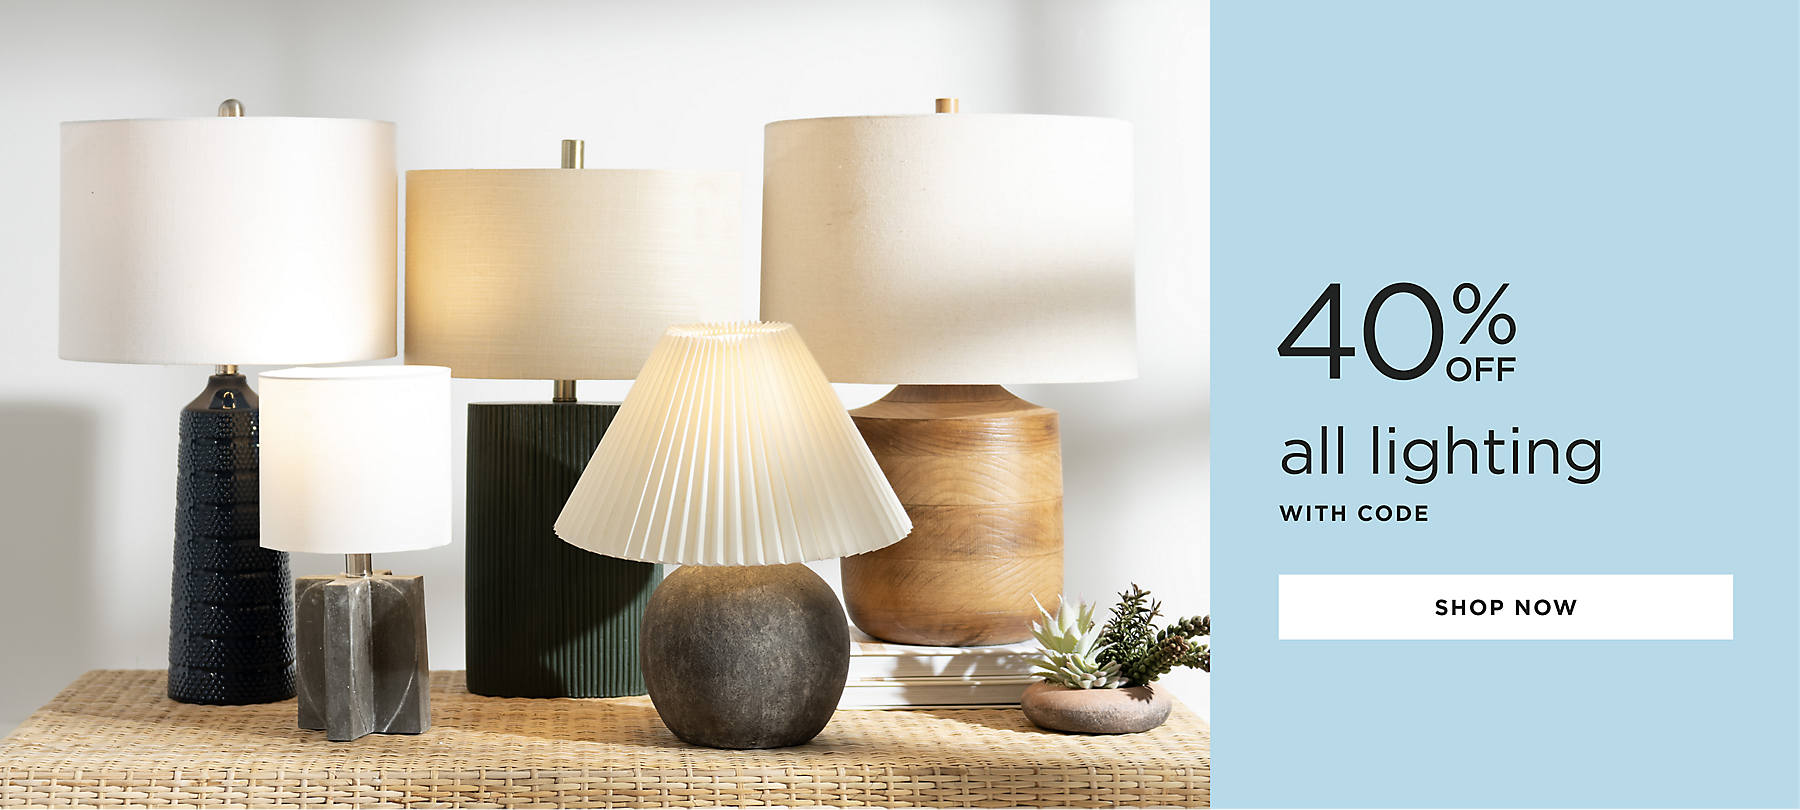 all lighting 40% off with code shop now